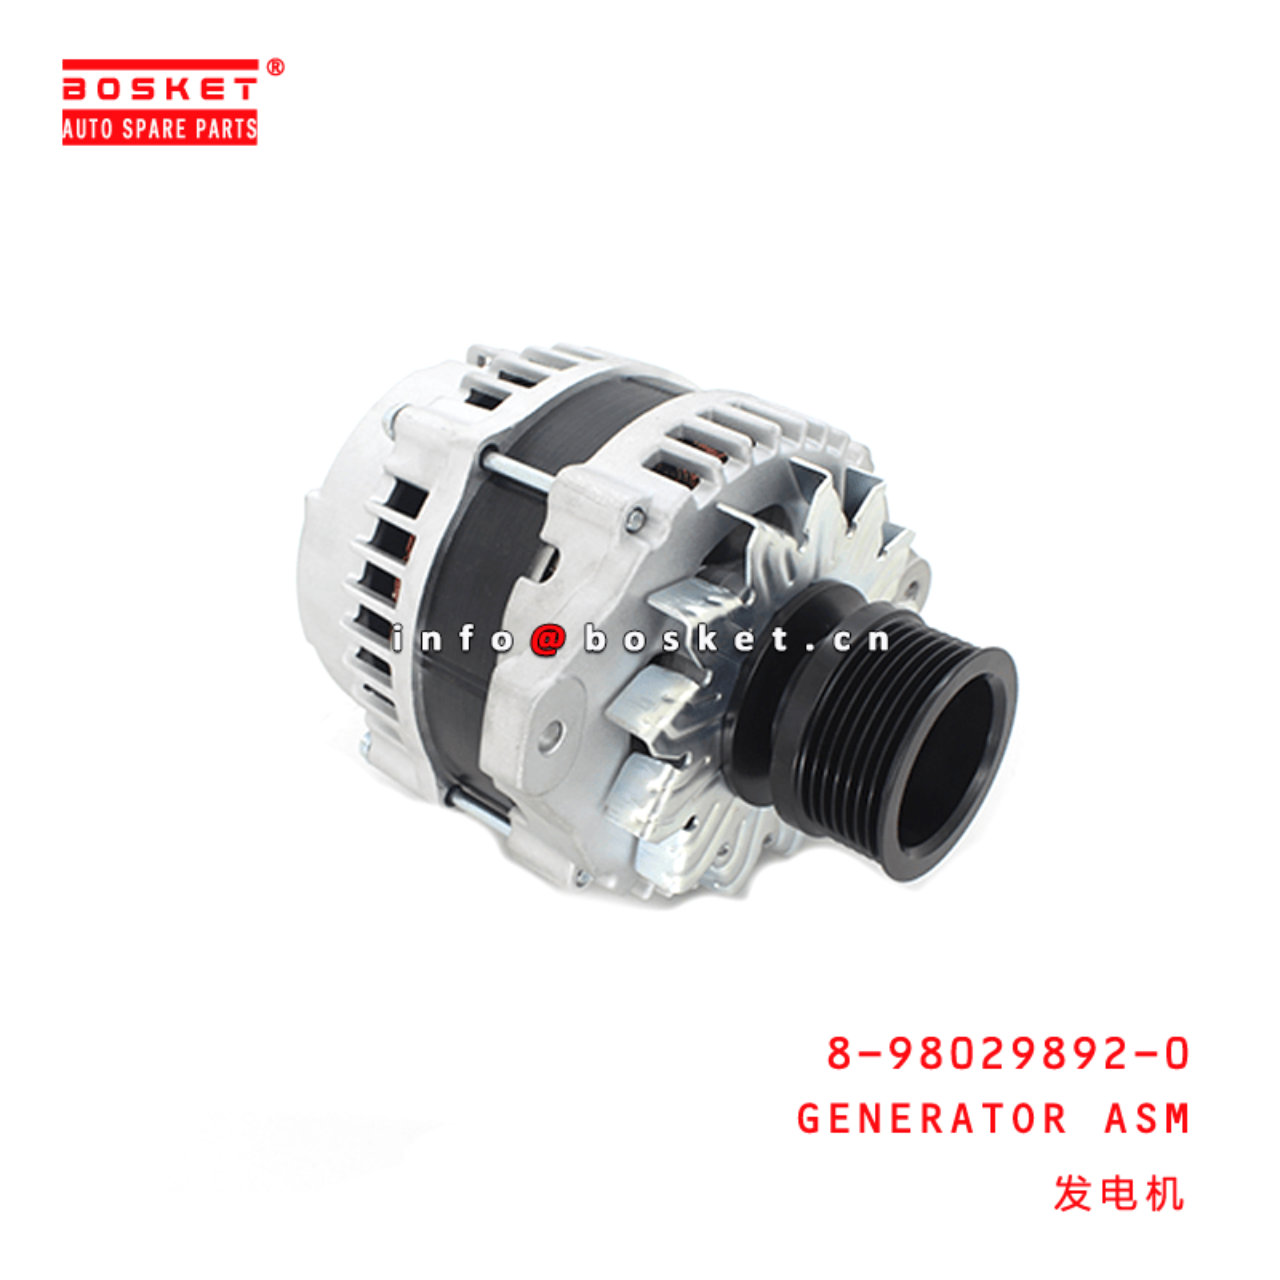 8-98029892-0 Generator Assembly 8980298920 Suitable for ISUZU NKR 